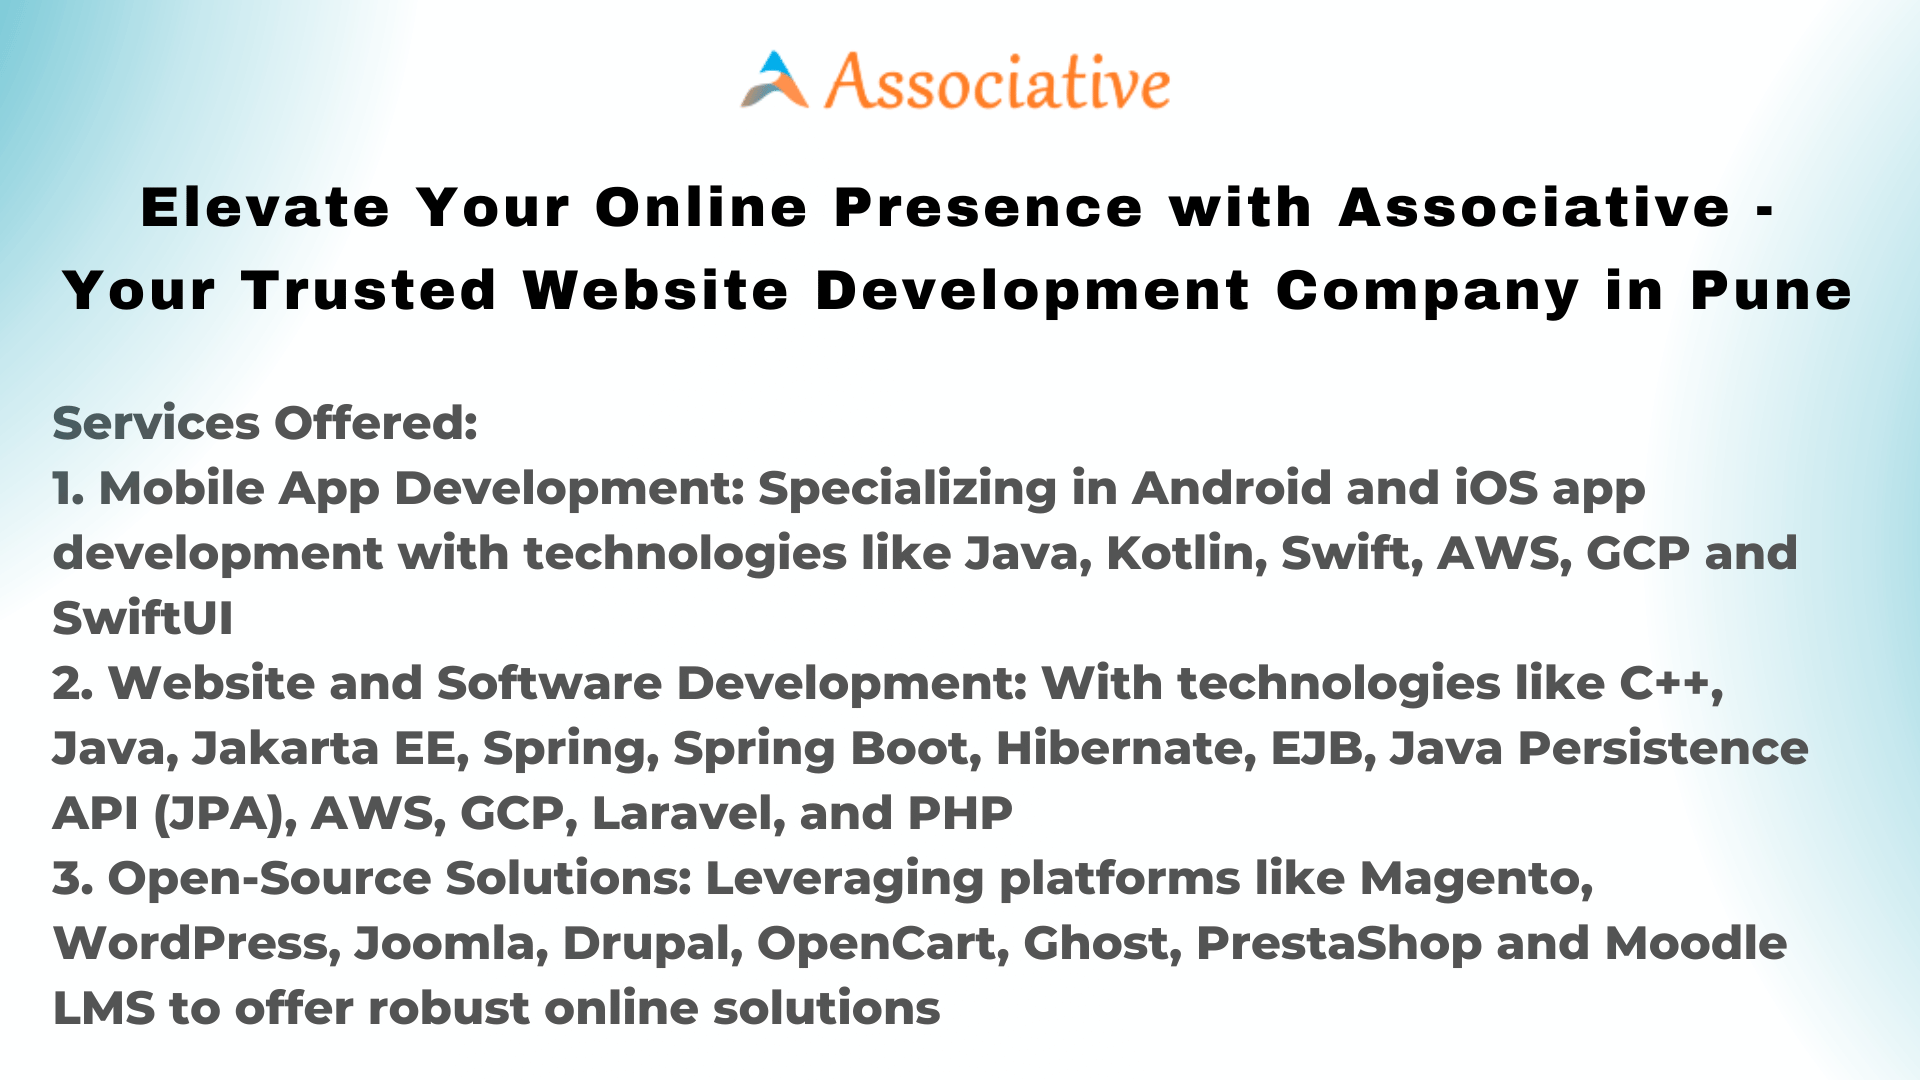 Elevate Your Online Presence with Associative - Your Trusted Website Development Company in Pune